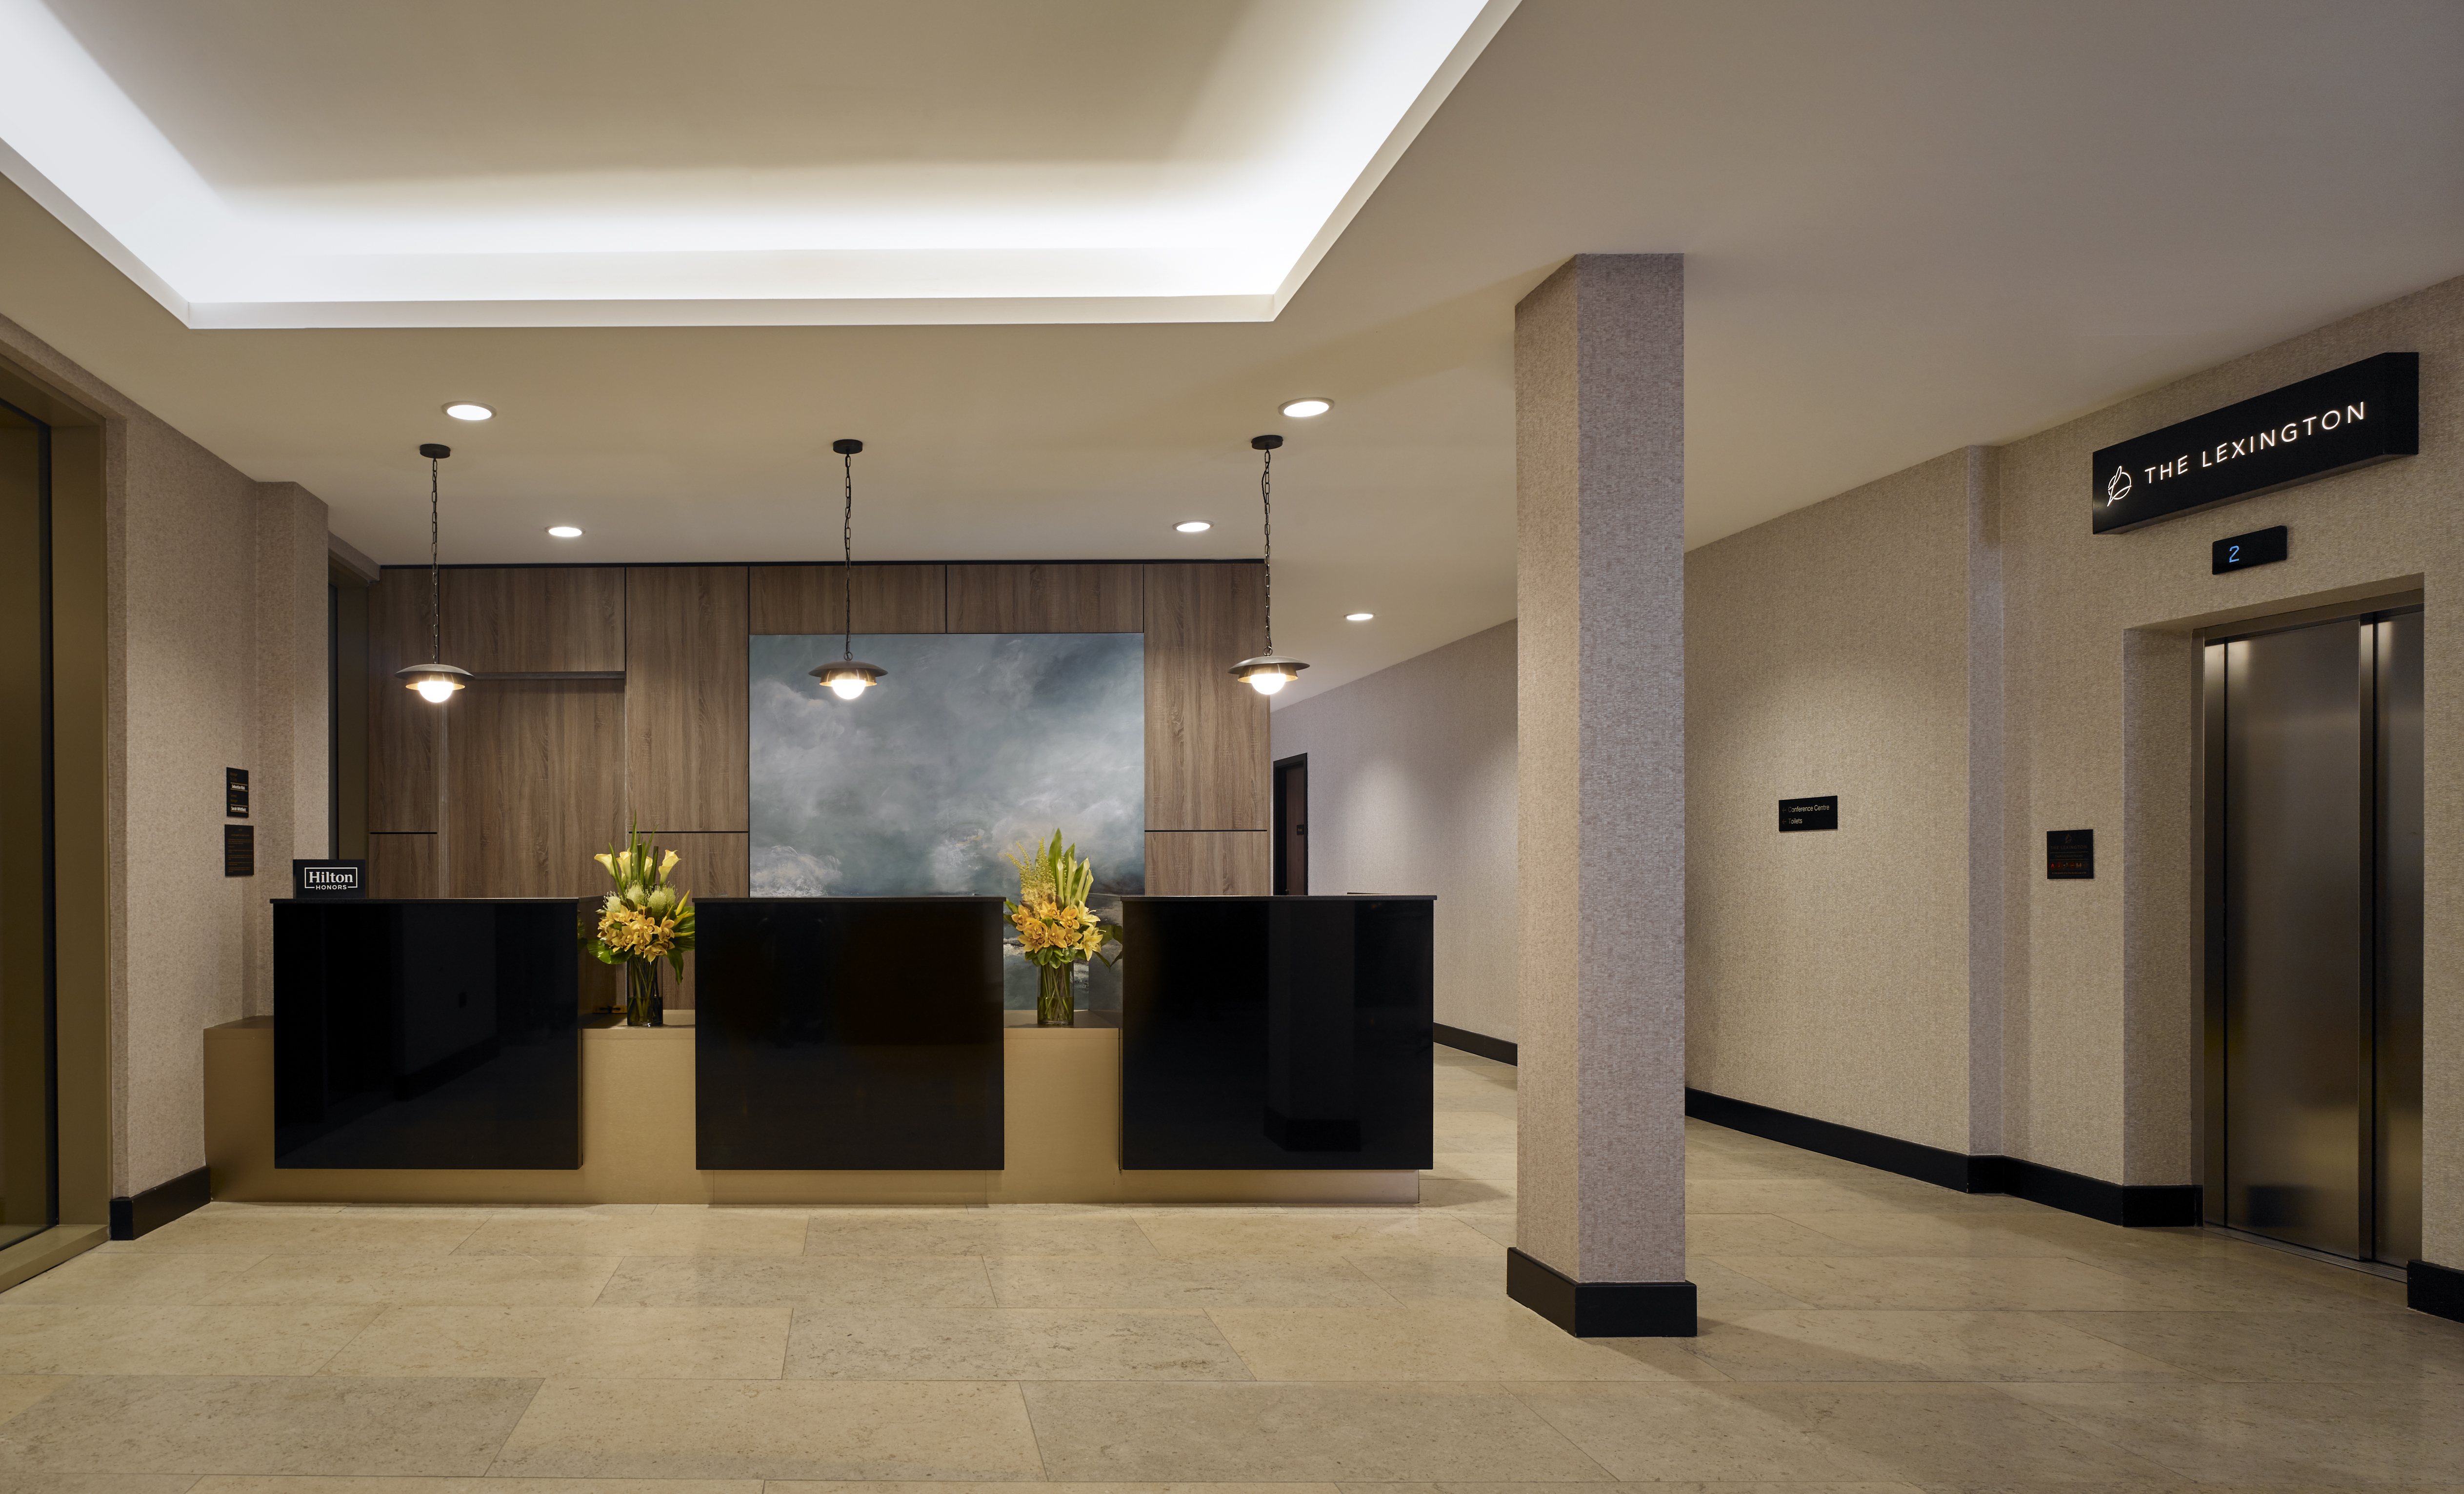 Hotel Front Desk Reception Area with Modern Brown and Tan Decor and Fresh Flowers with Granite Floor and Grand Ceiling